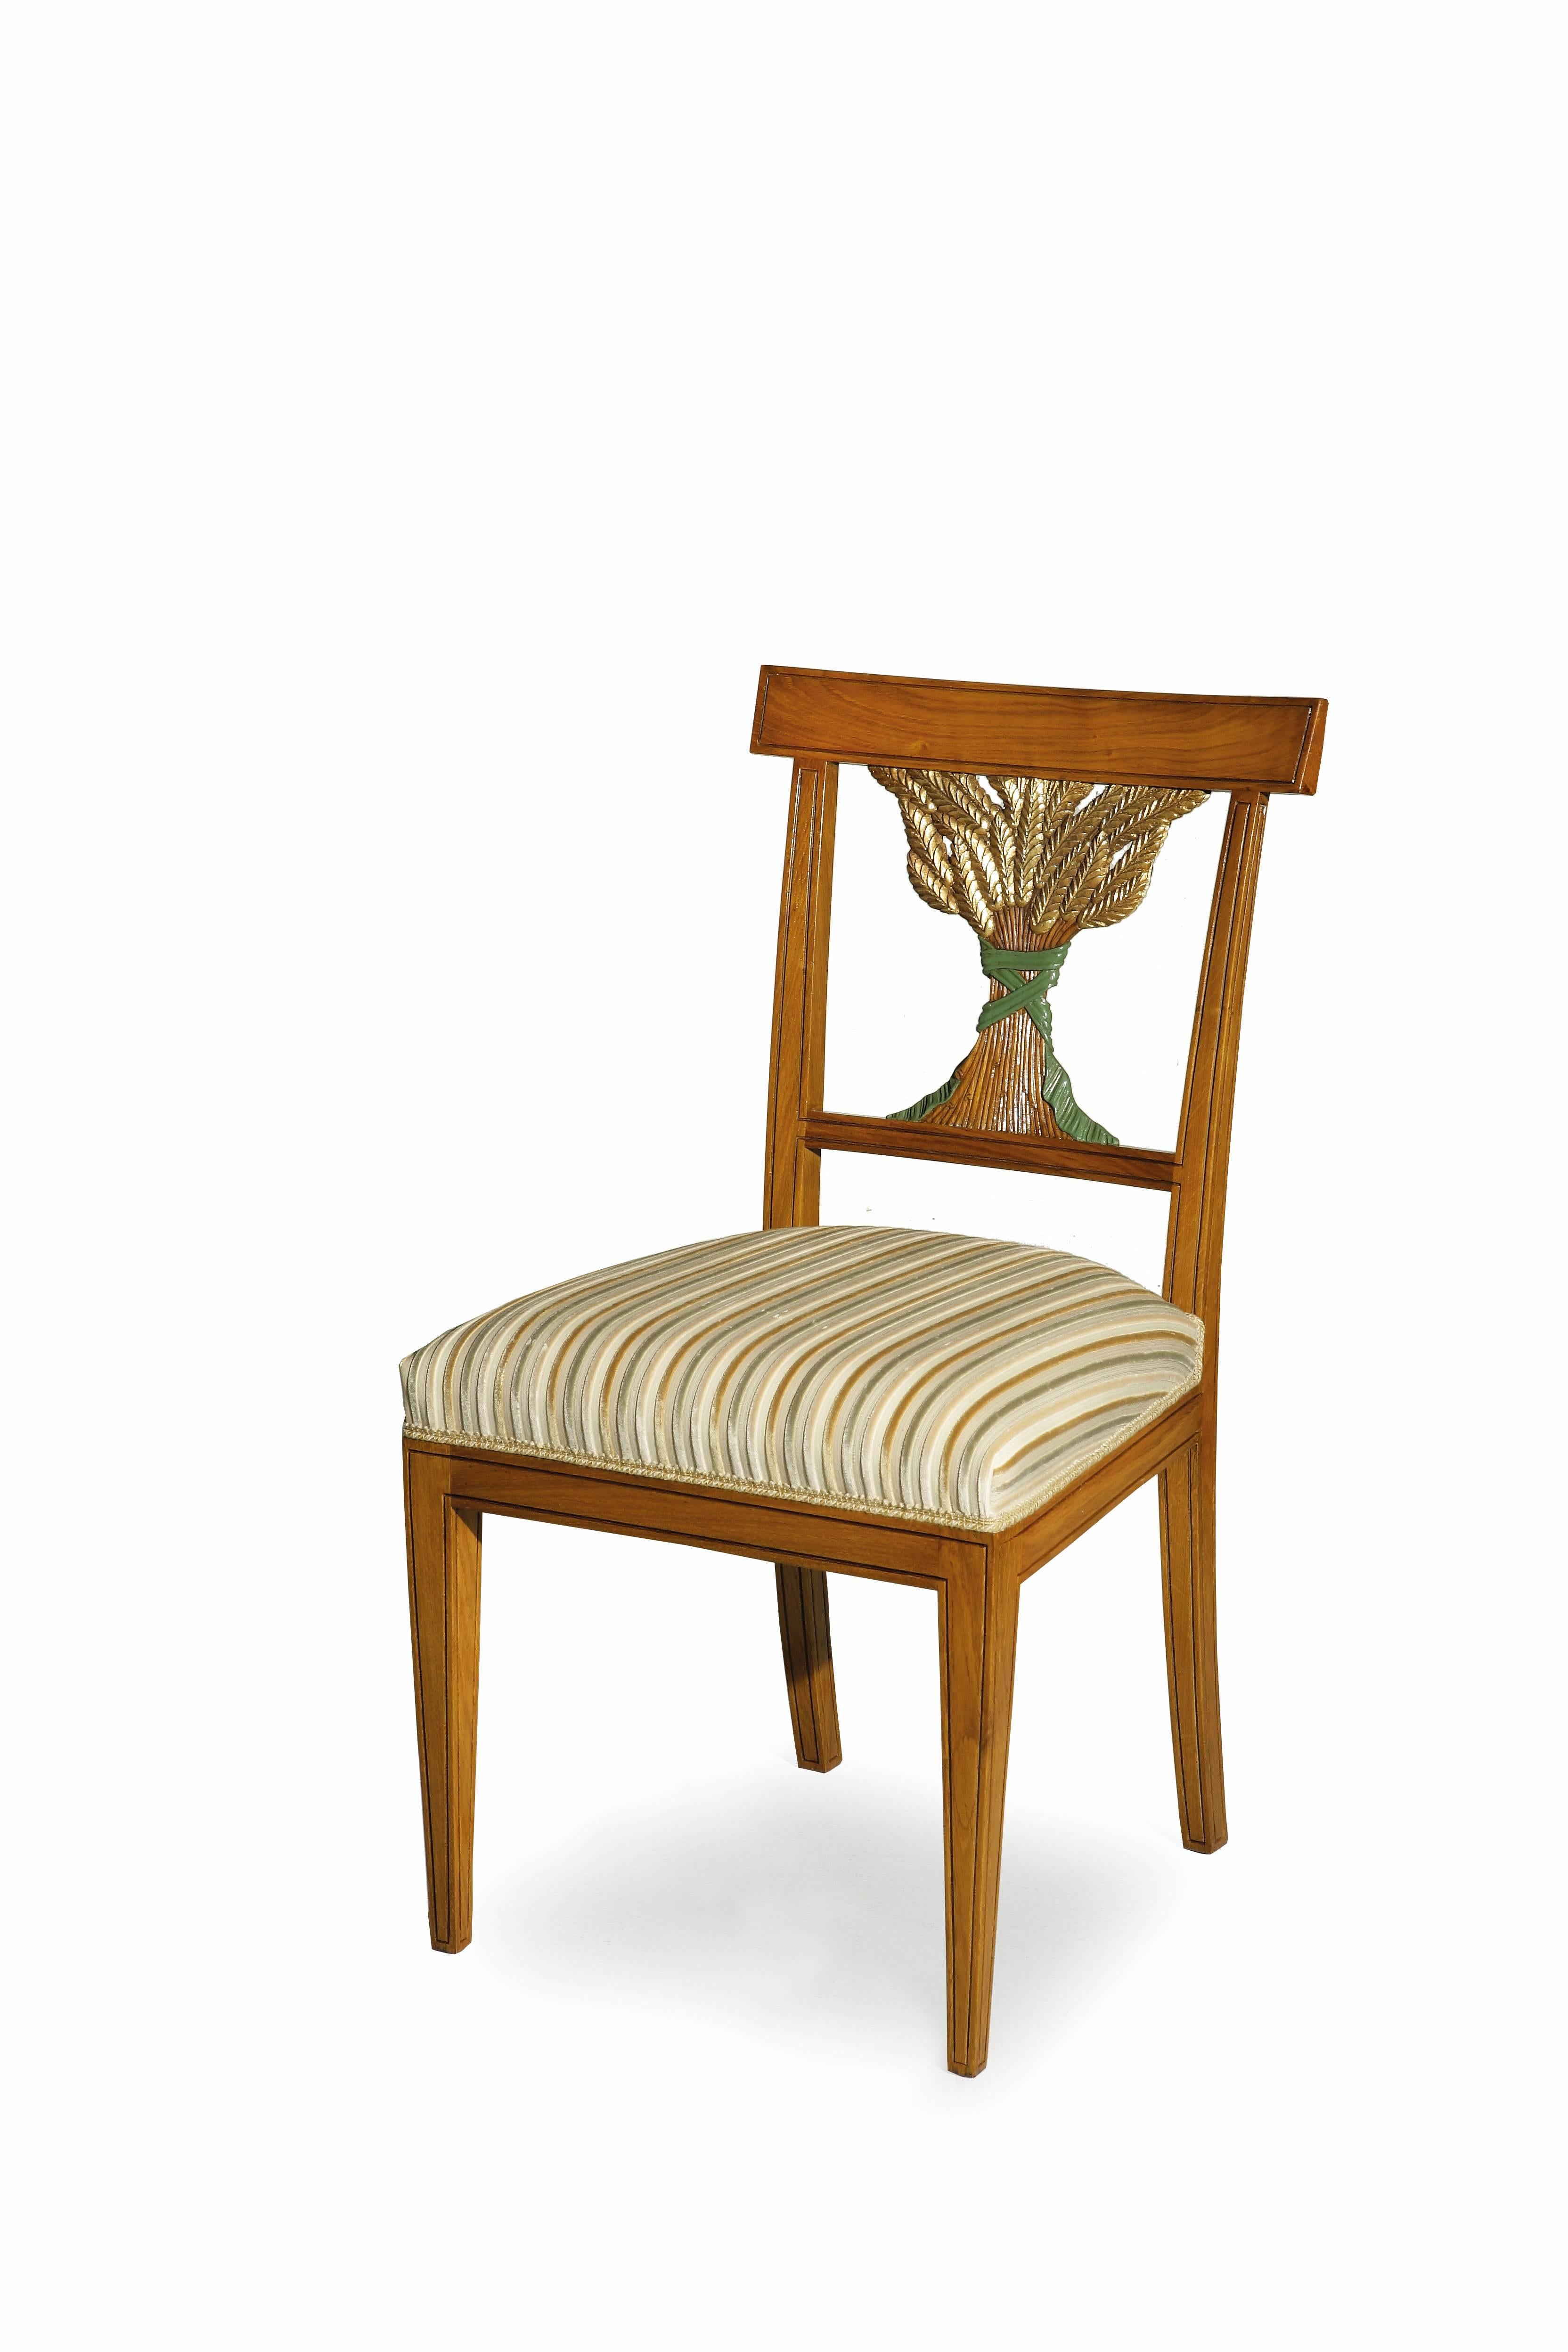 Oak Dining Chair with Decorative Ears of Wheat Hand Carved, Made in Italy For Sale 2